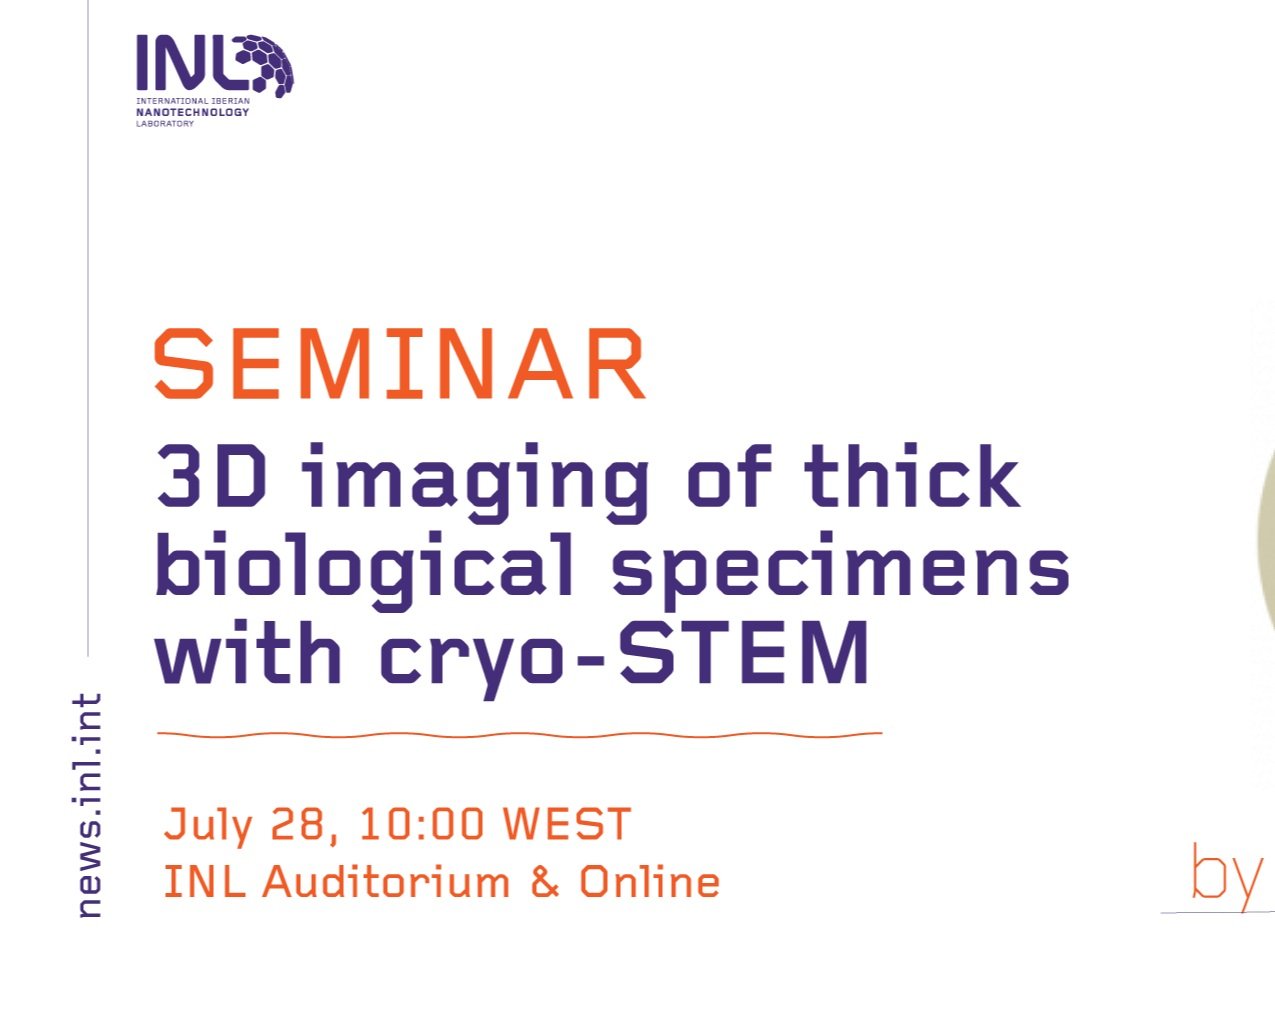 Seminar on 3D imaging of thick biological specimens with cryo-STEM, by Michael Elbaum